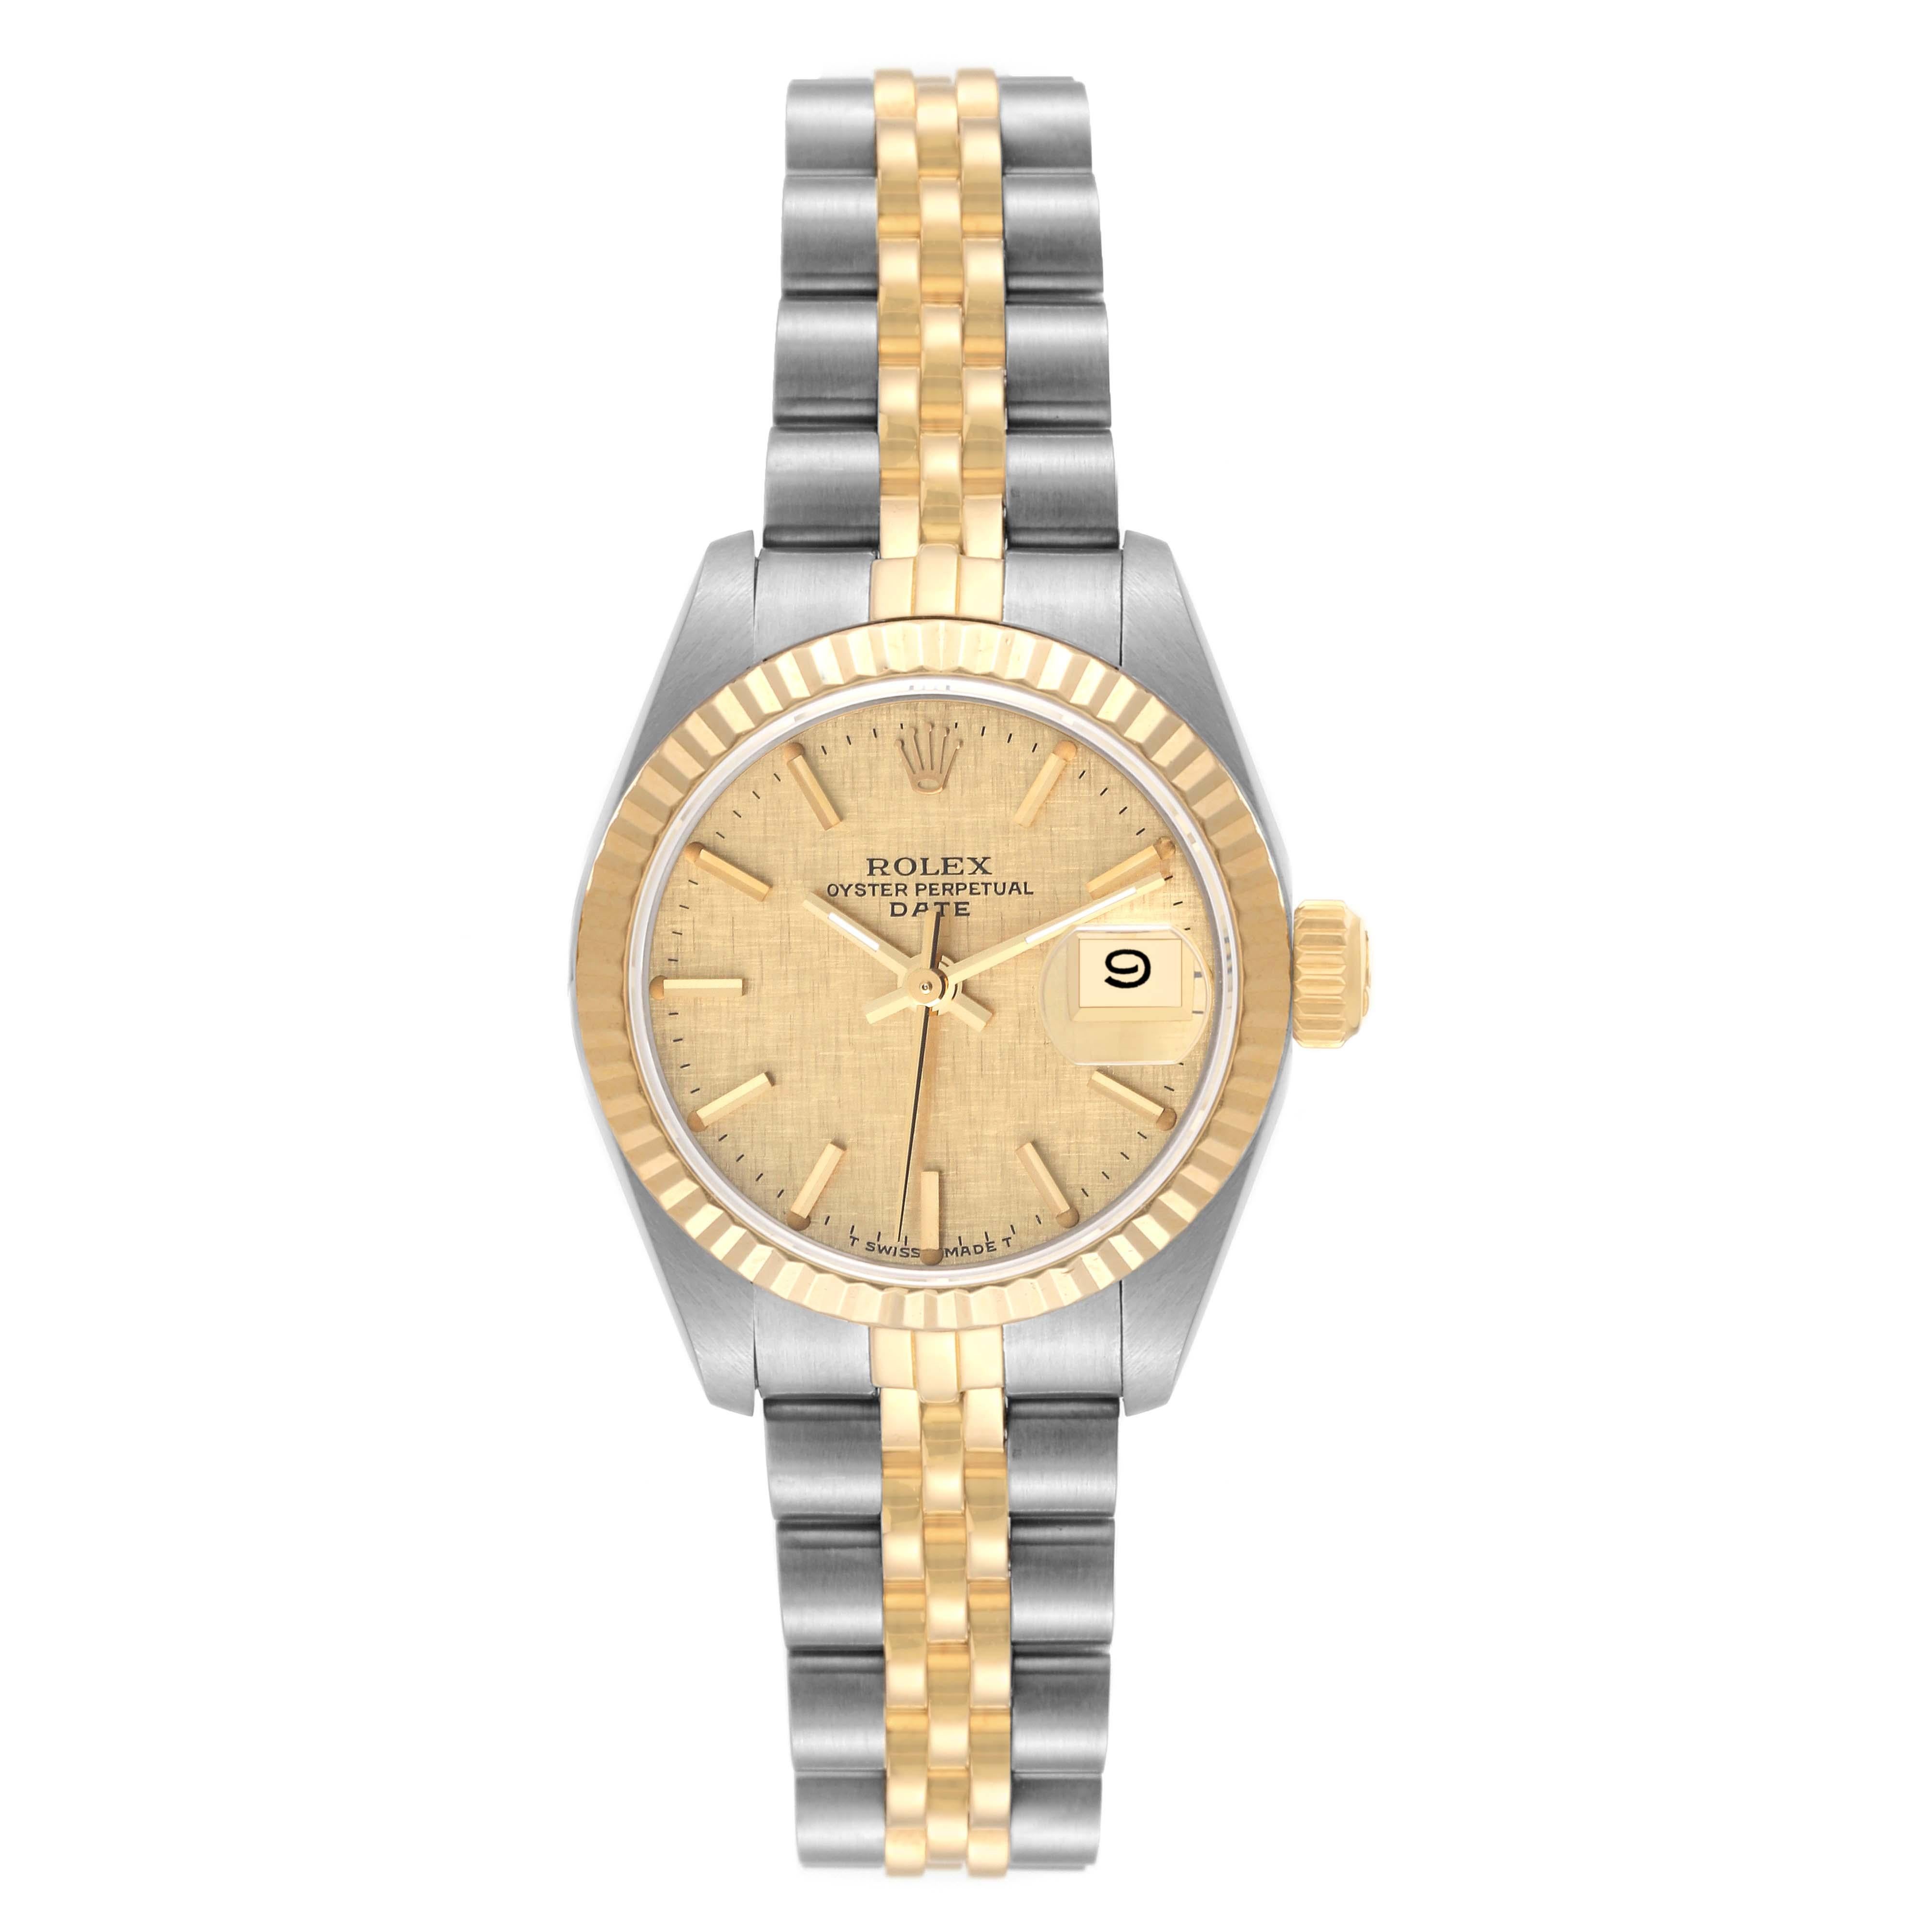 Rolex Datejust Steel Yellow Gold Champagne Linen Dial Ladies Watch 69173. Officially certified chronometer automatic self-winding movement. Stainless steel oyster case 26.0 mm in diameter. Rolex logo on the crown. 18k yellow gold fluted bezel.